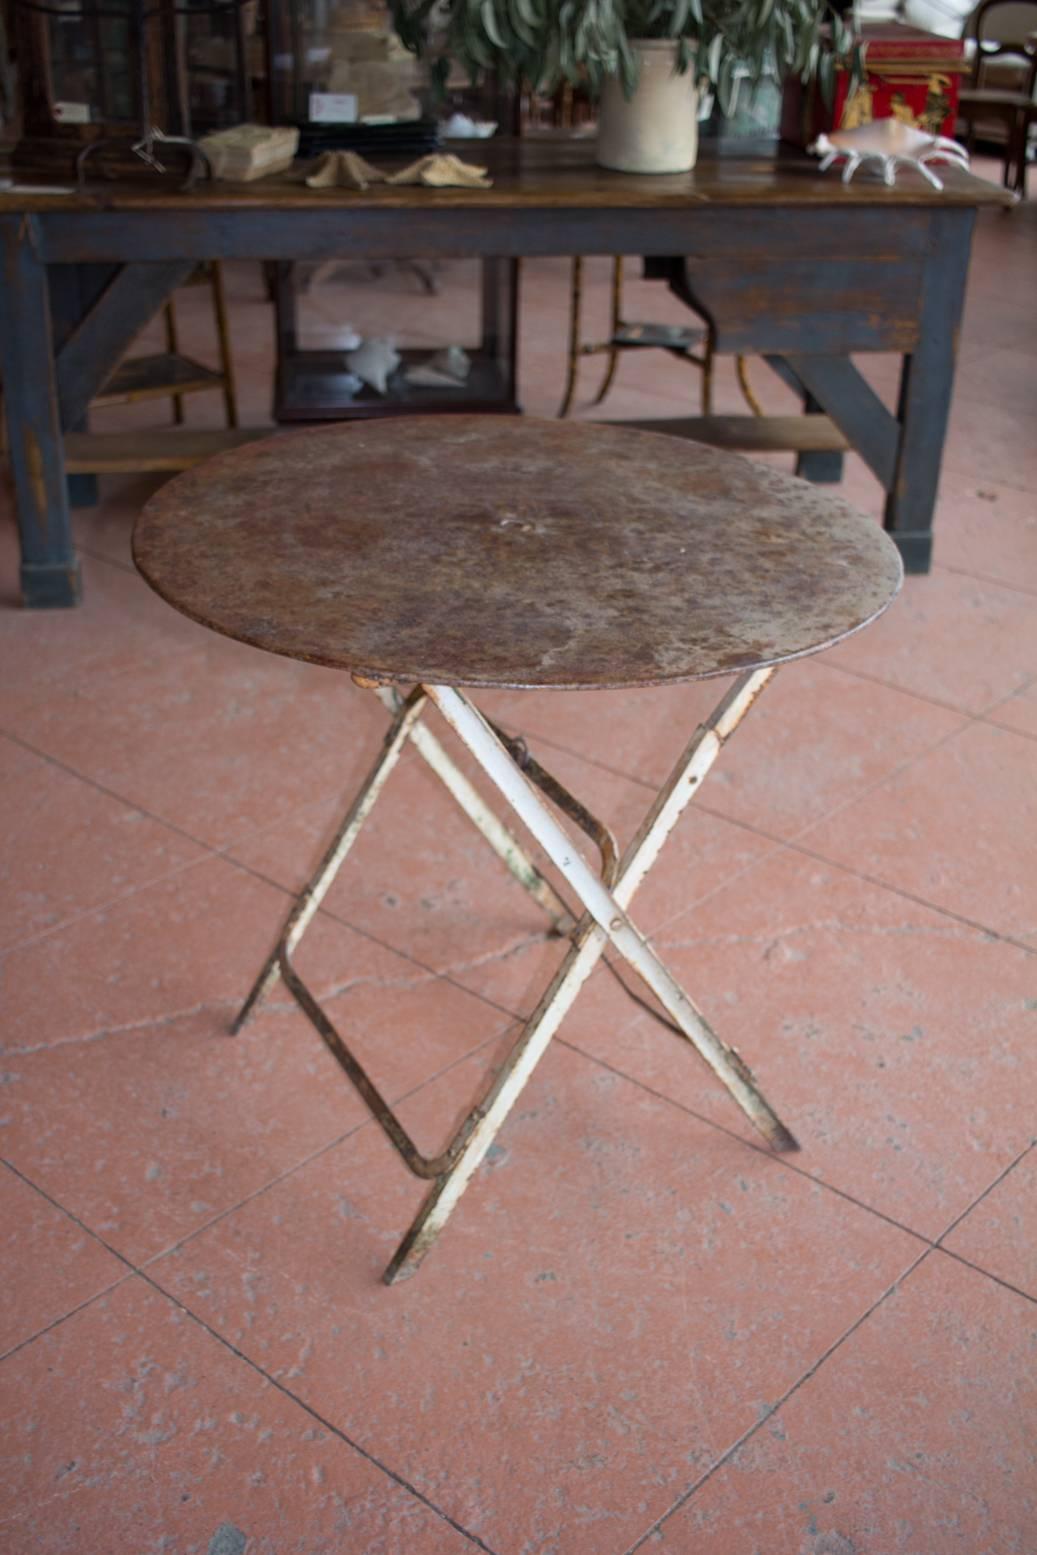 Antique French metal folding garden or bistro table. The table has been sealed to retain its gorgeous patina!